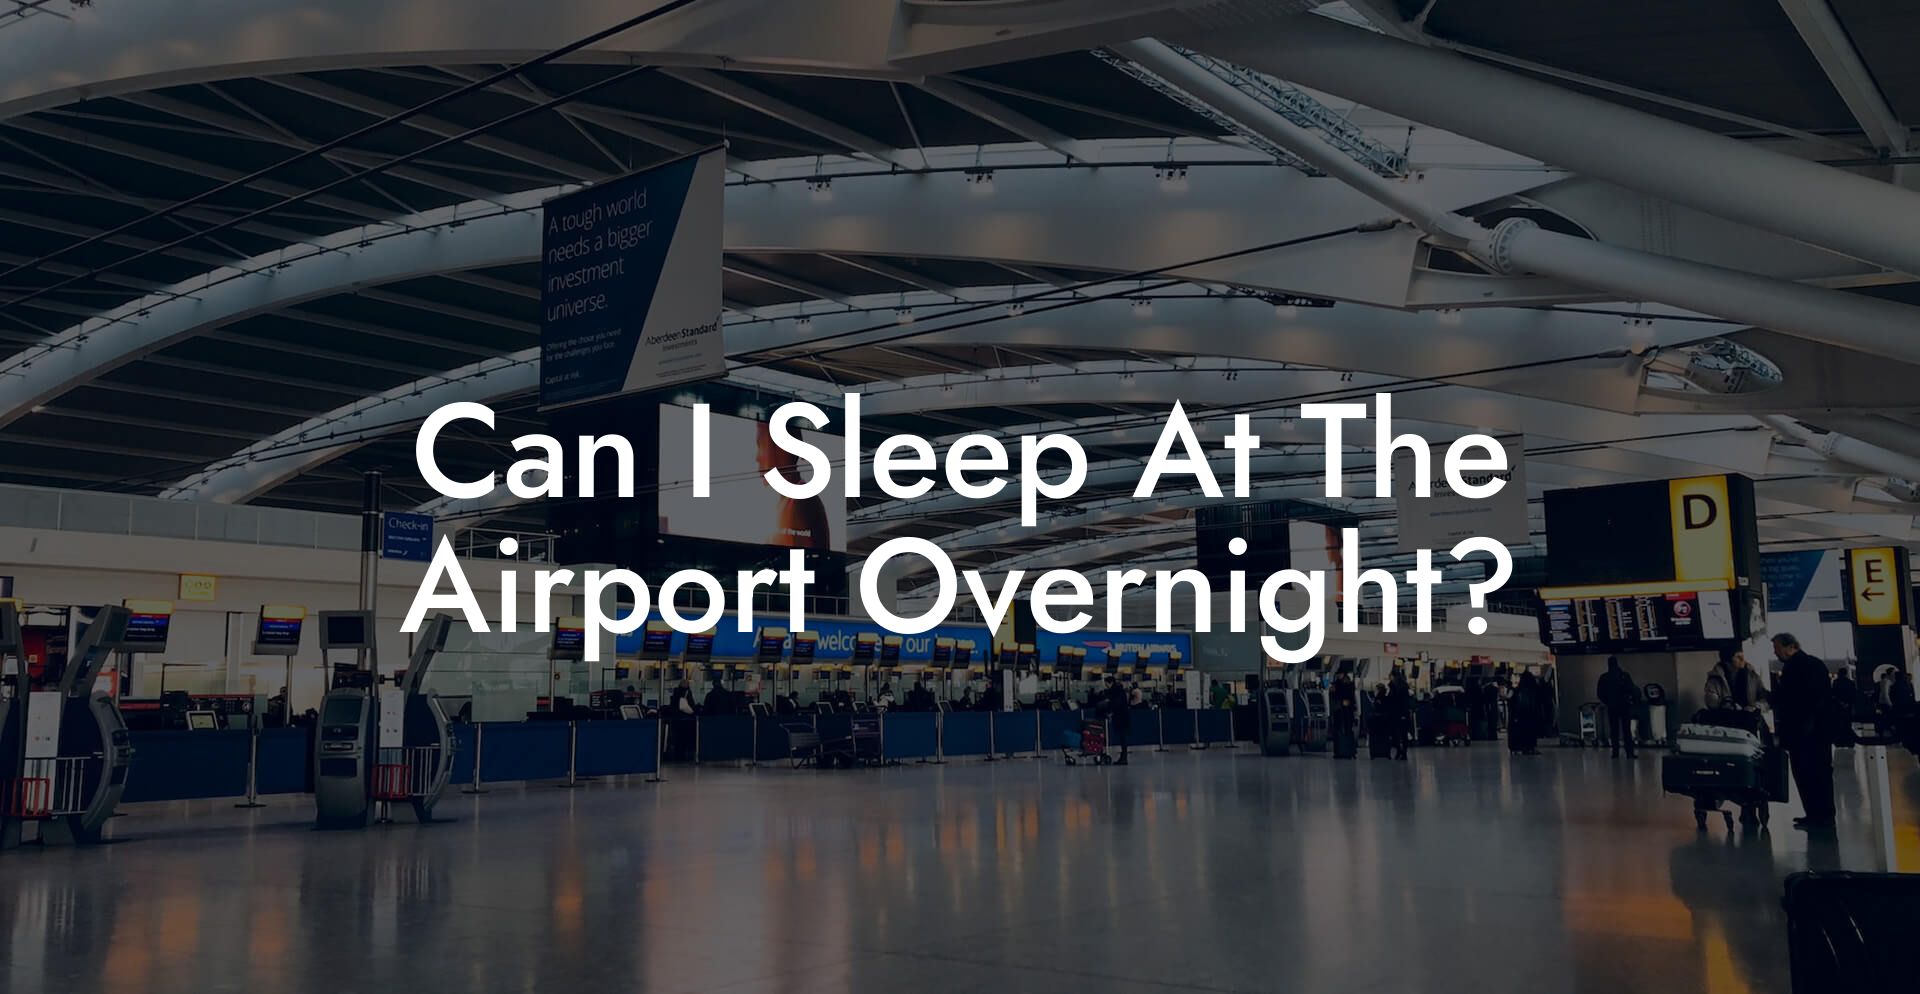 Can I Sleep At The Airport Overnight?